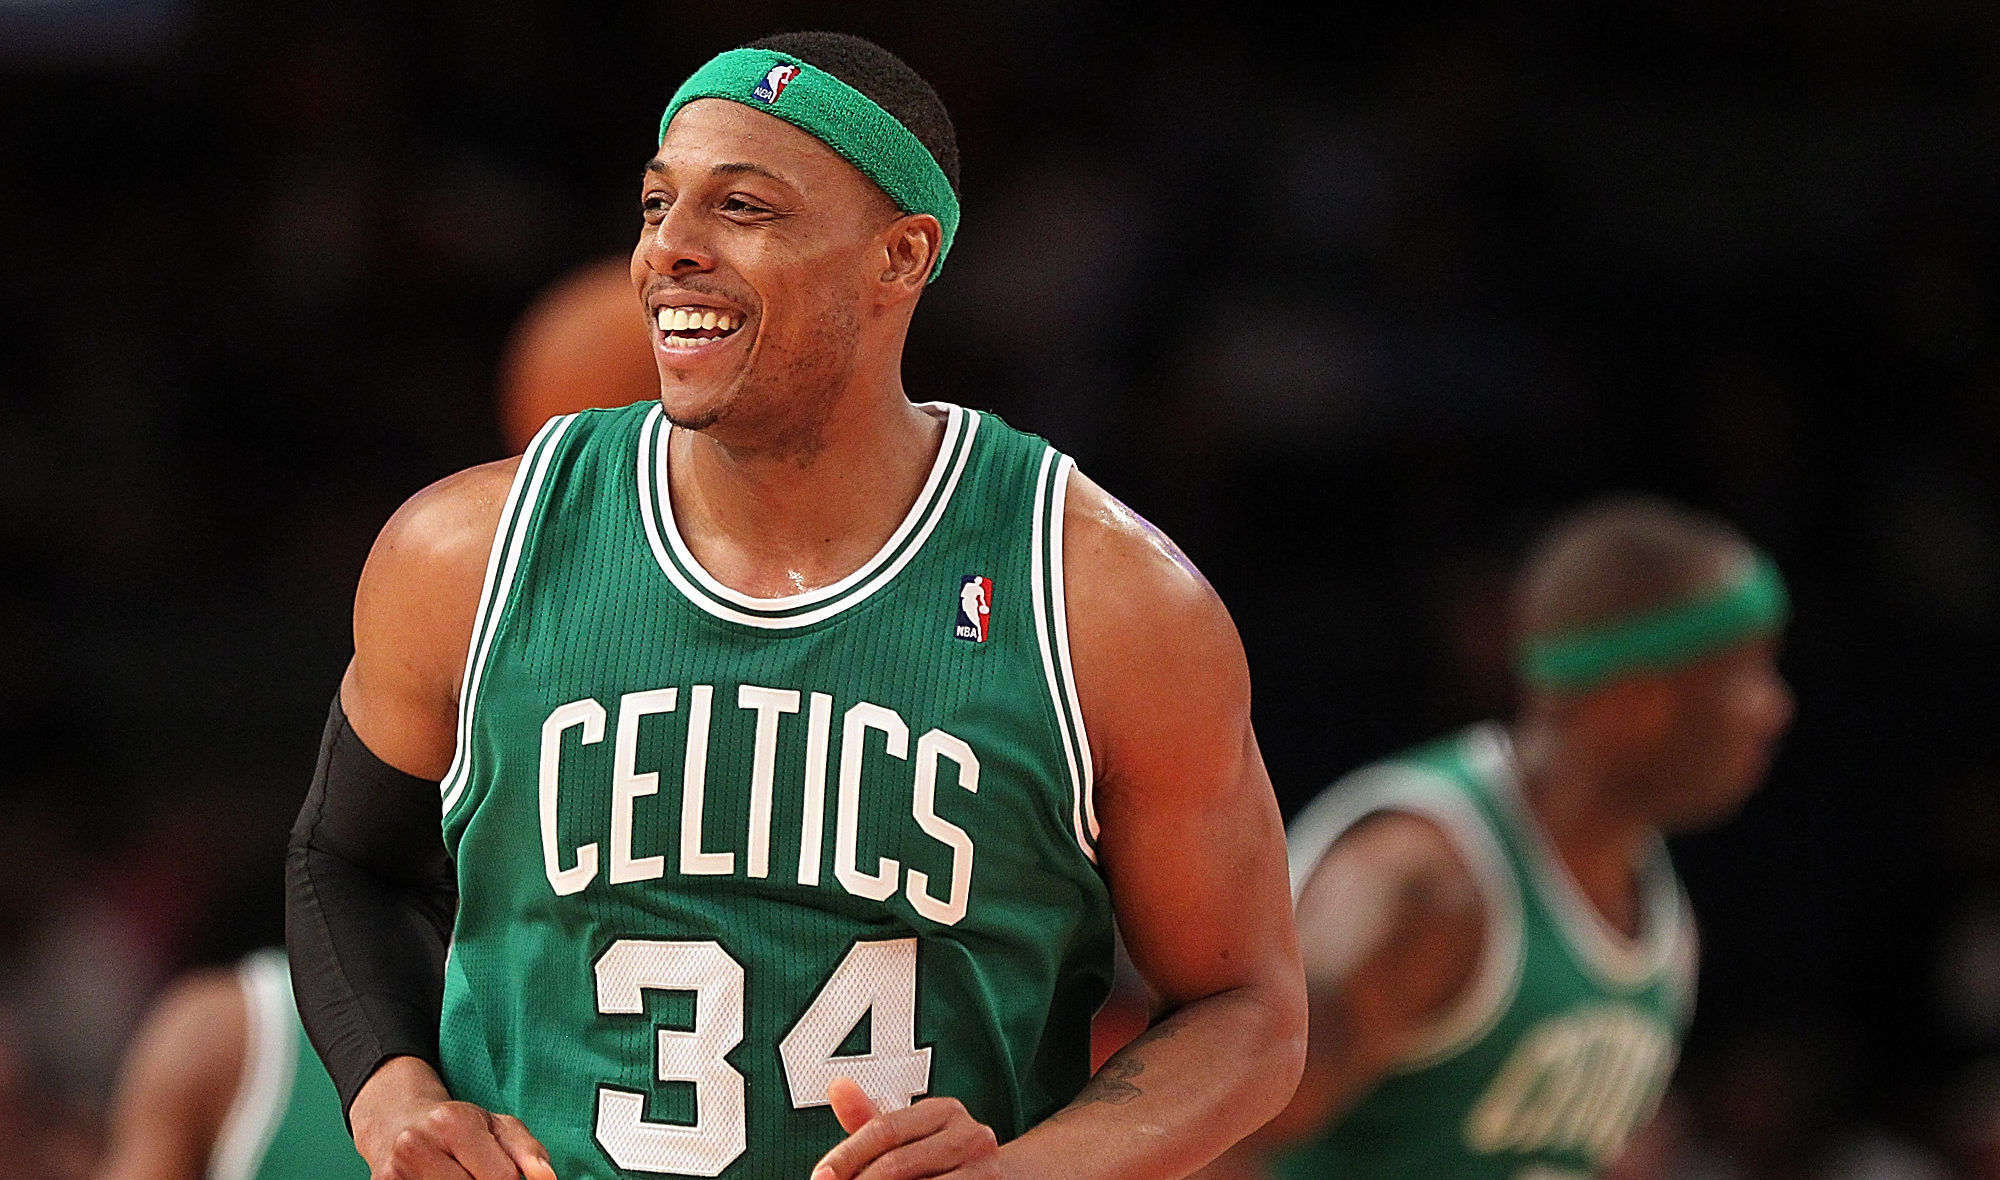 Meet the man who creates viral Celtics jersey designs after every win